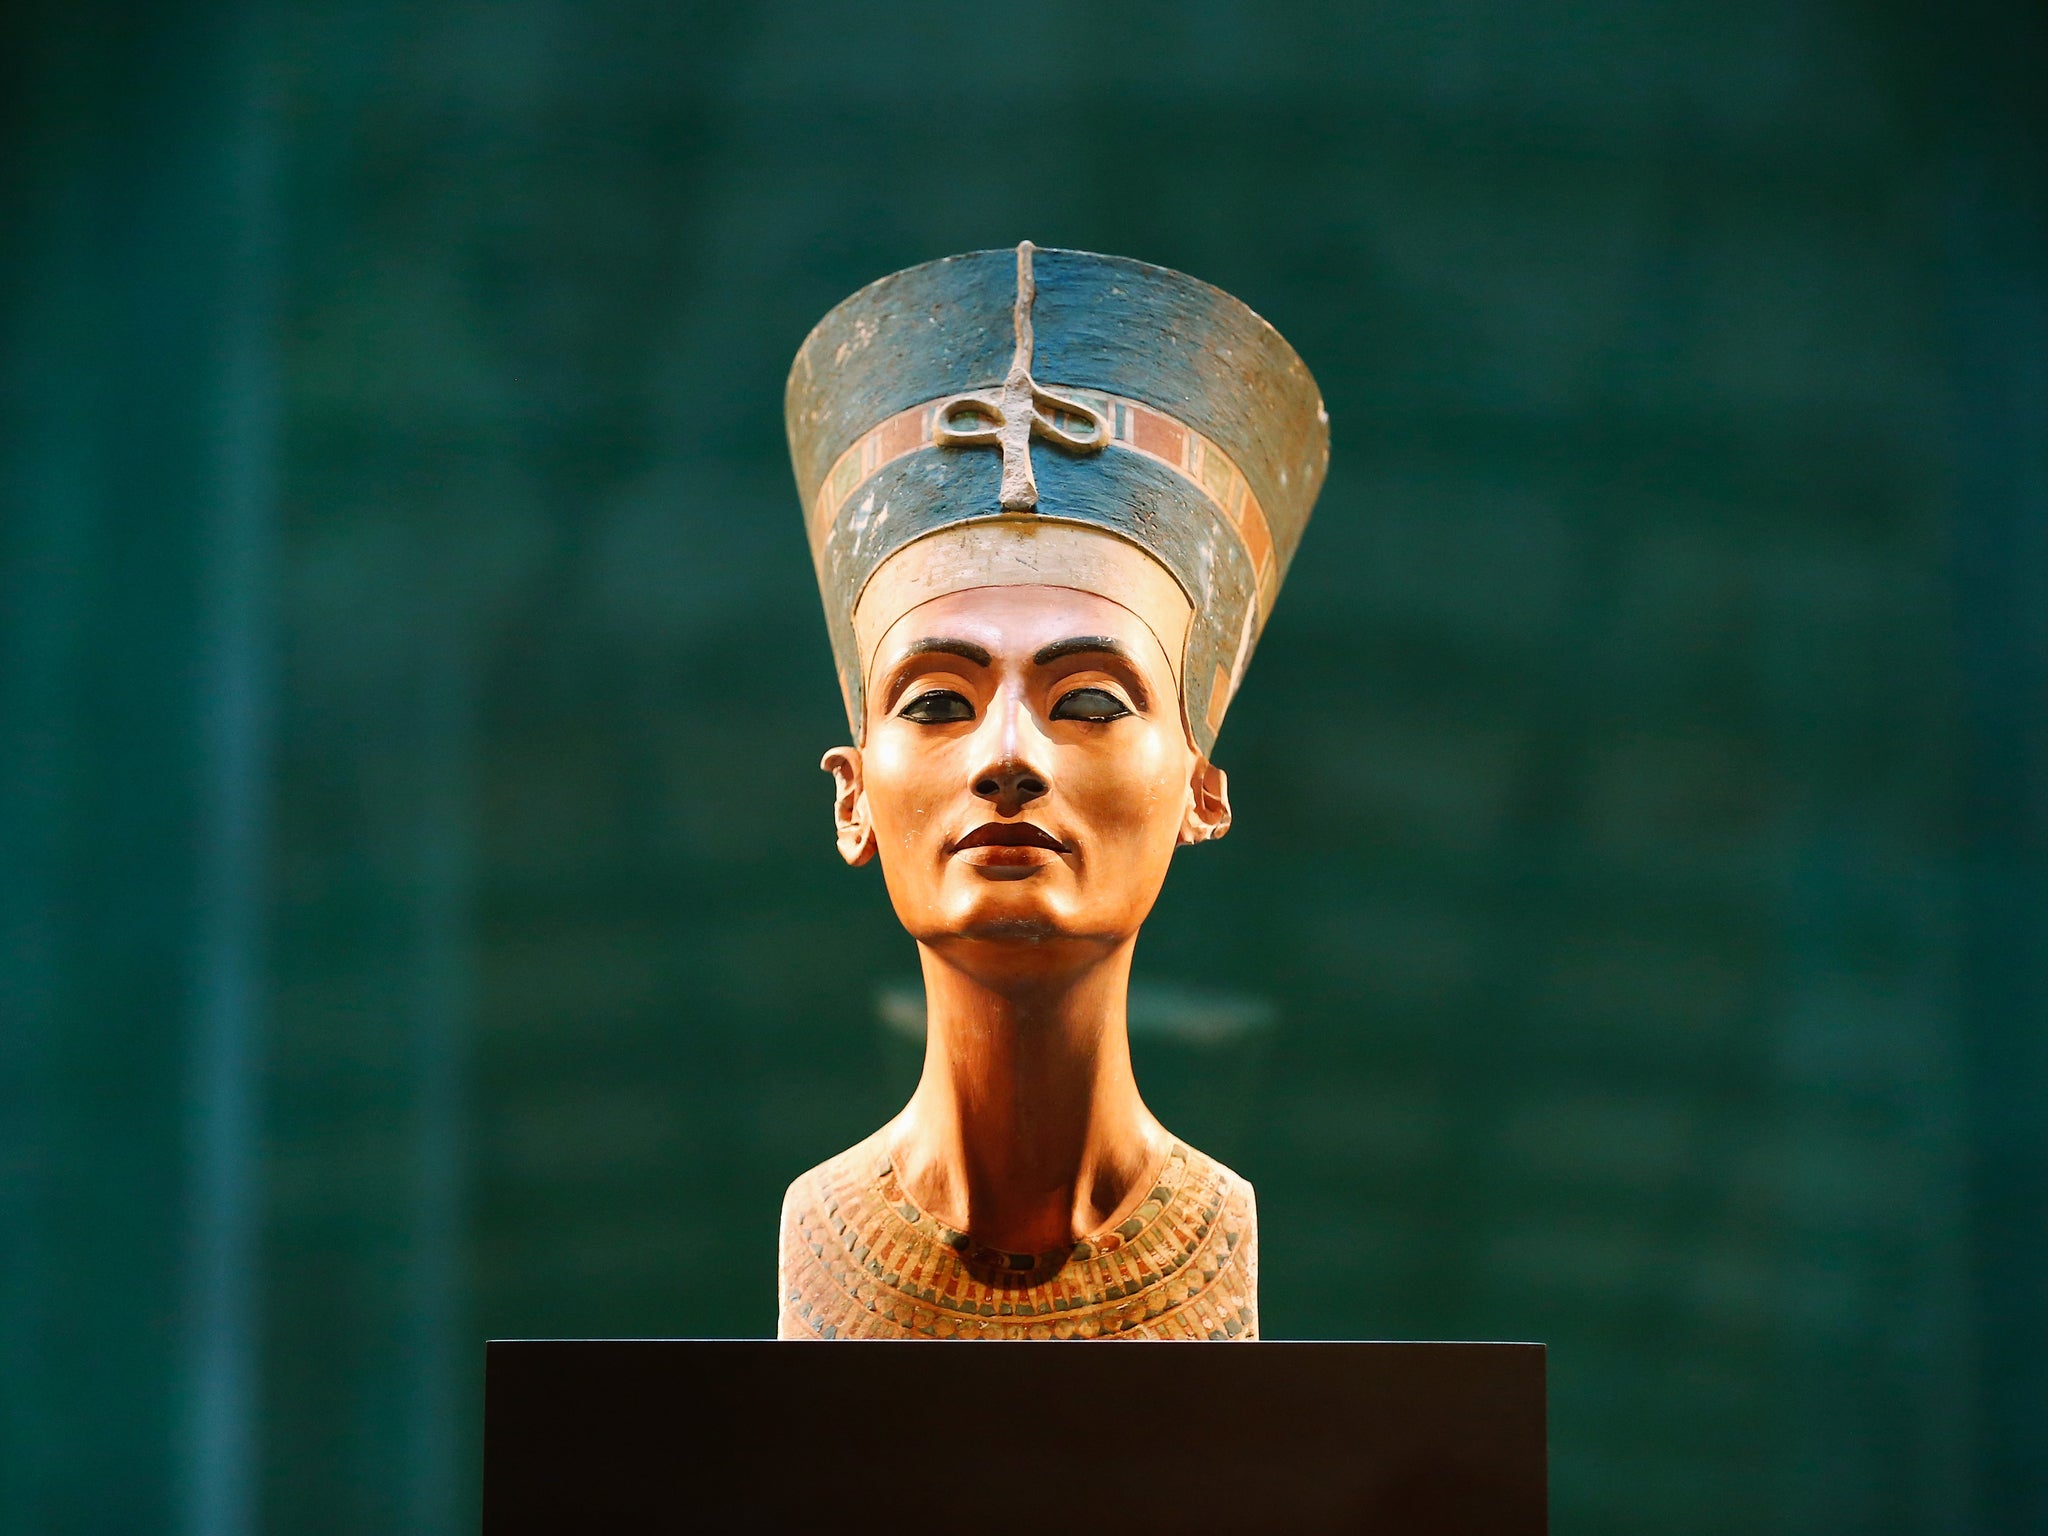 The bust of Egyptian beauty Queen Nefertiti is on display at Neues Museum in Berlin, Germany.